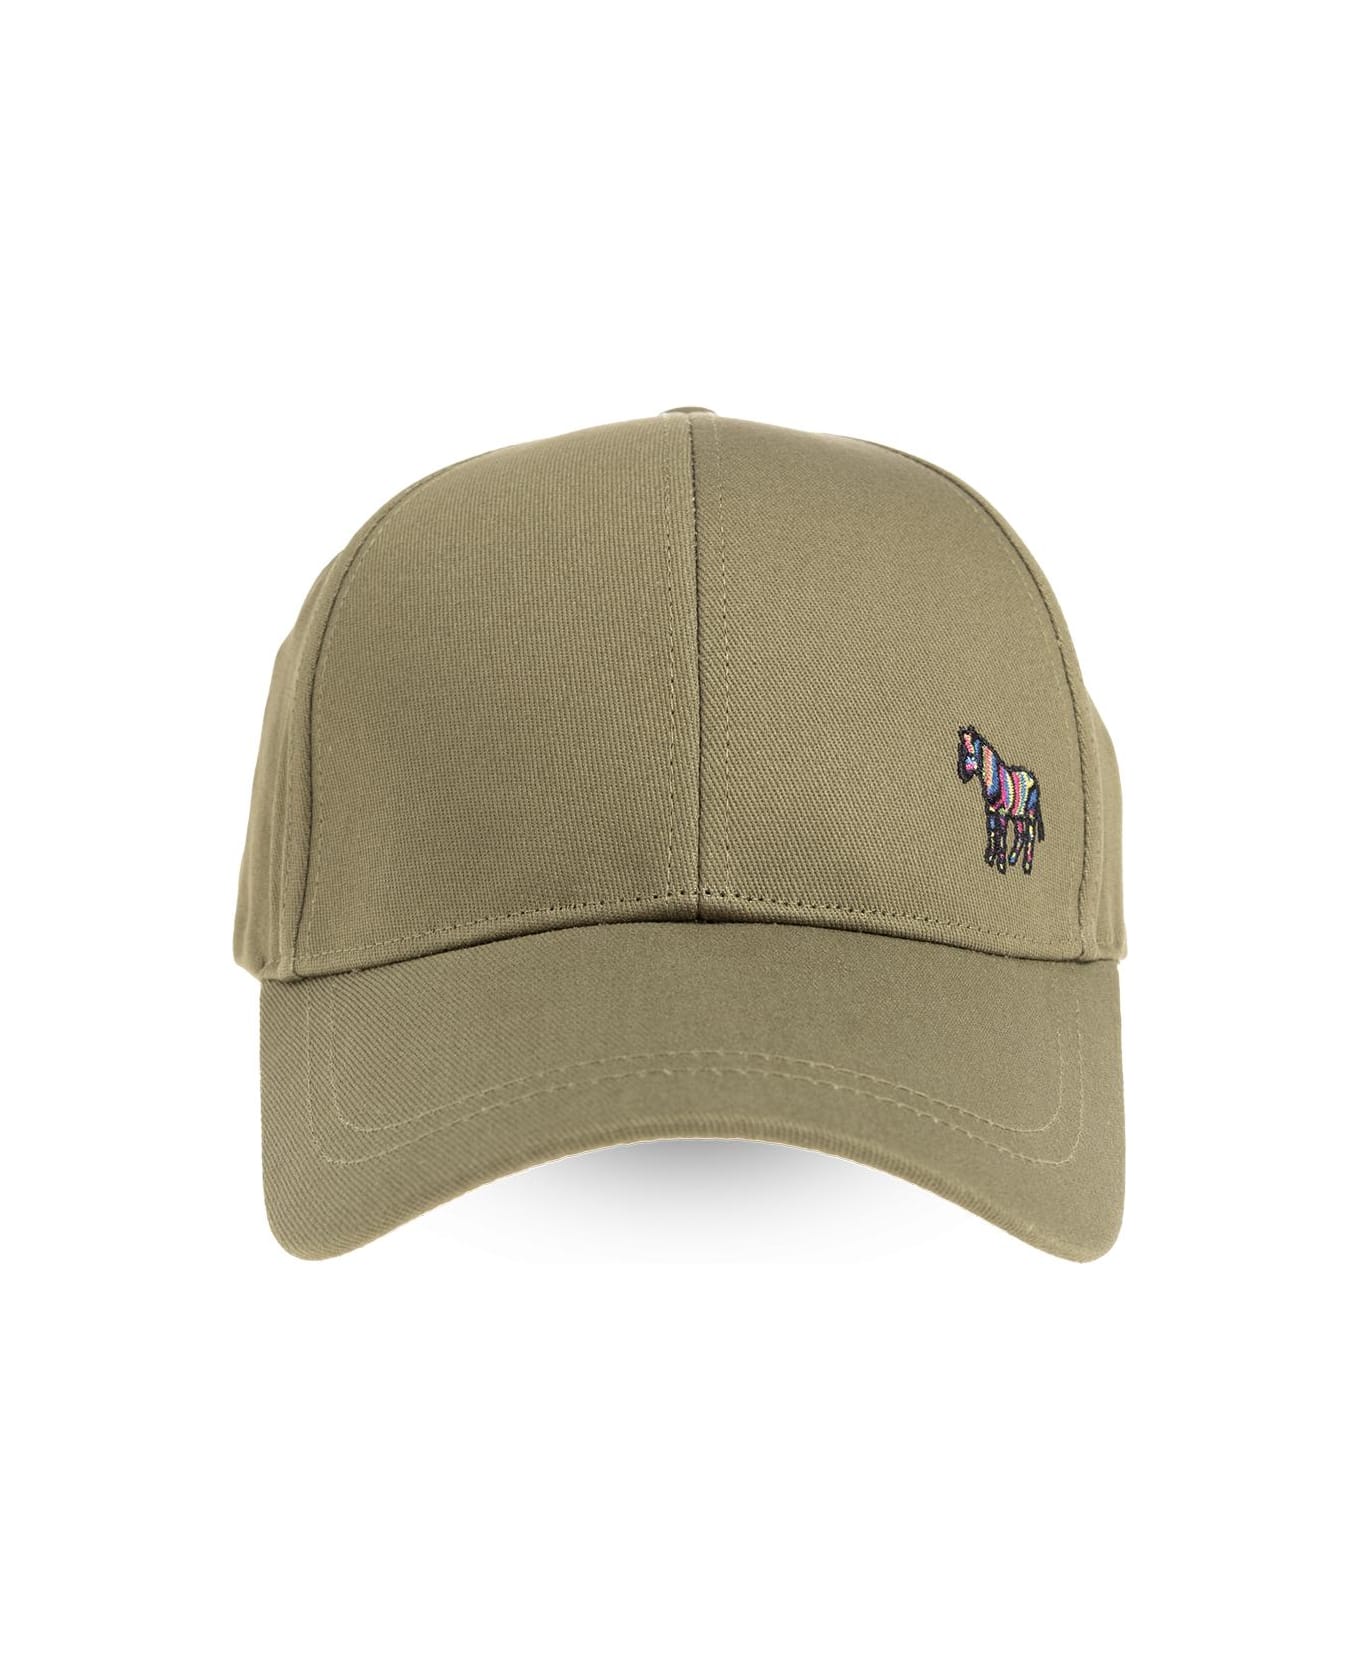 PS by Paul Smith Ps Paul Smith Baseball Cap With Patch - GREY